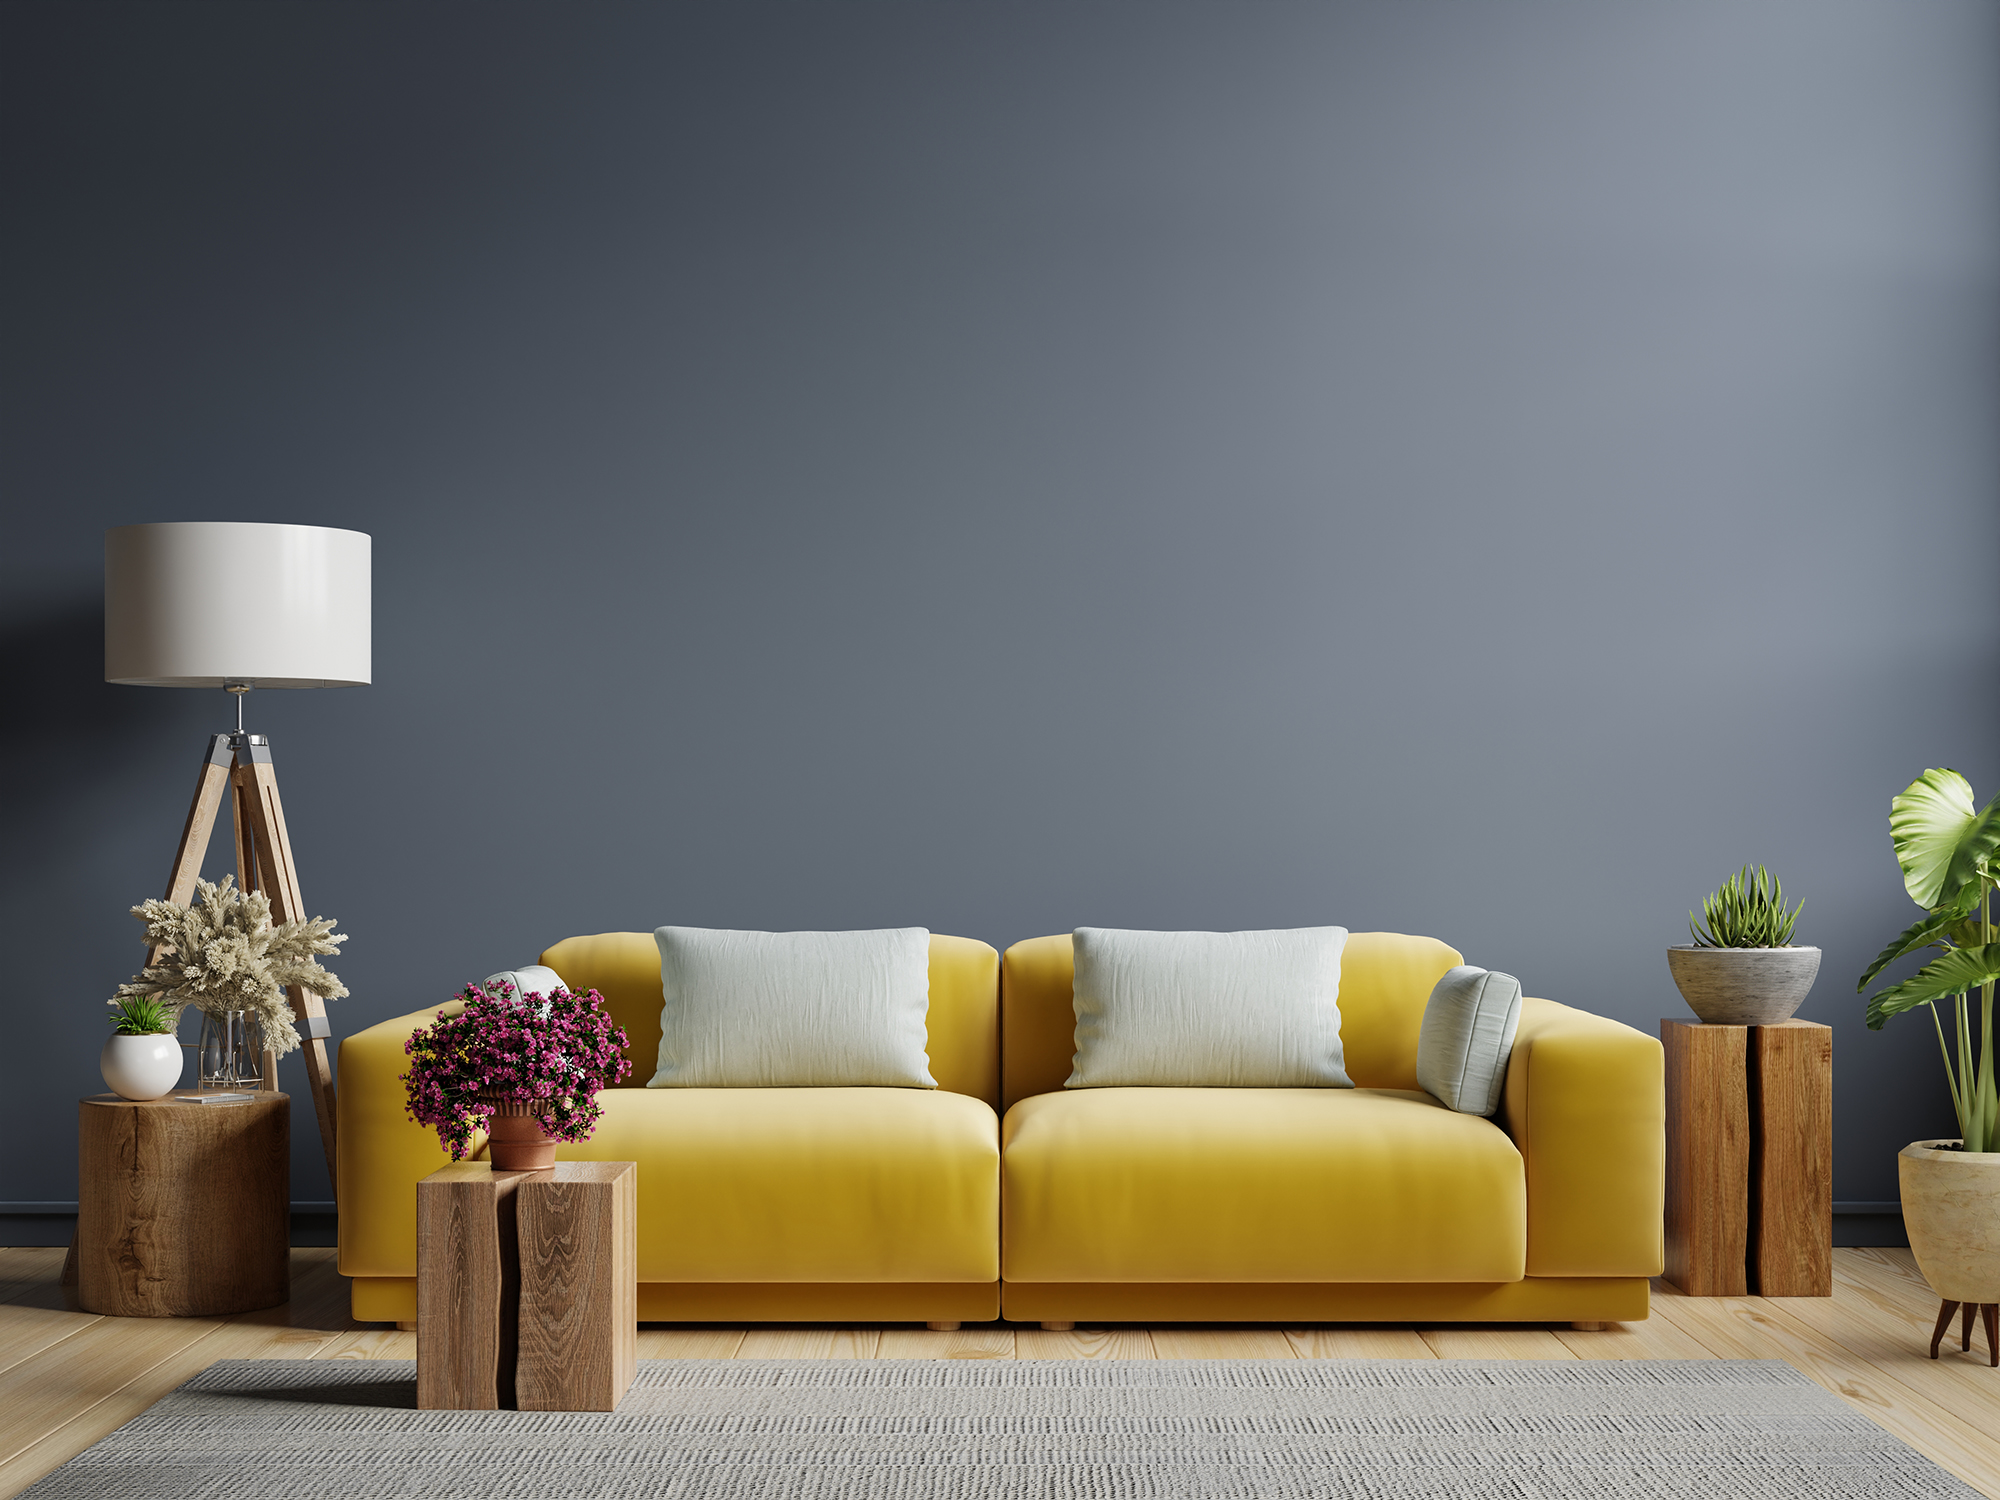 Interior mockup dark blue wall with yellow sofa and decor in liv